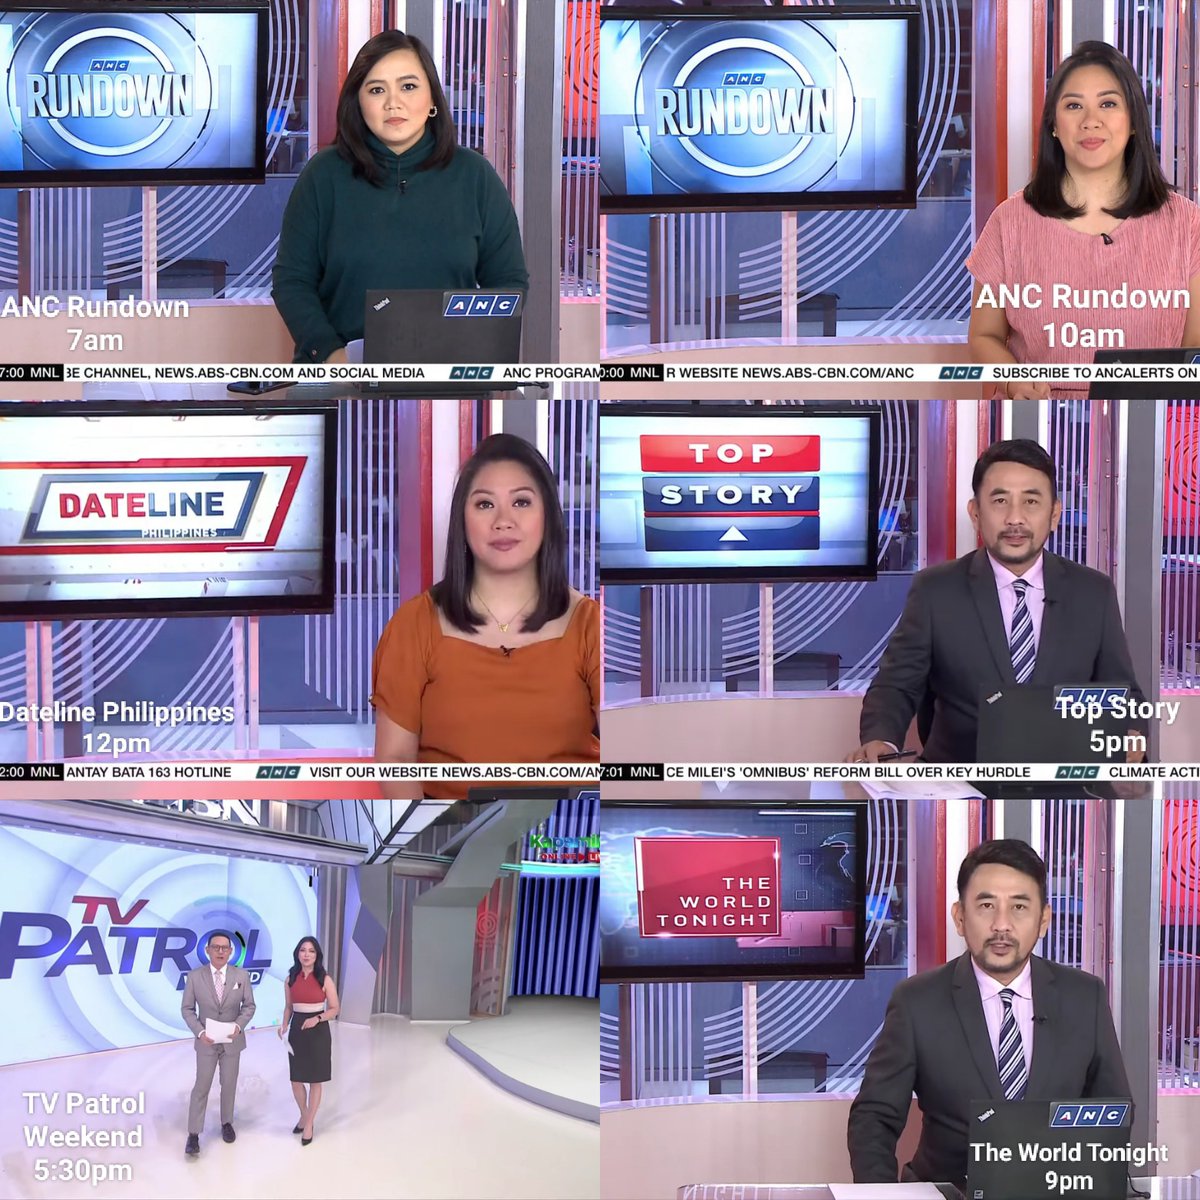 Your updated weekend newscast guide on ANC this 2024.

#ANCRundown
#DatelinePhilippines
#ANCTopStory
#TVPatrolWeekend
#TheWorldTonight

Take note that w/ the exception of TVP Weekend, ANC's weekend newscasts only air on Saturdays.